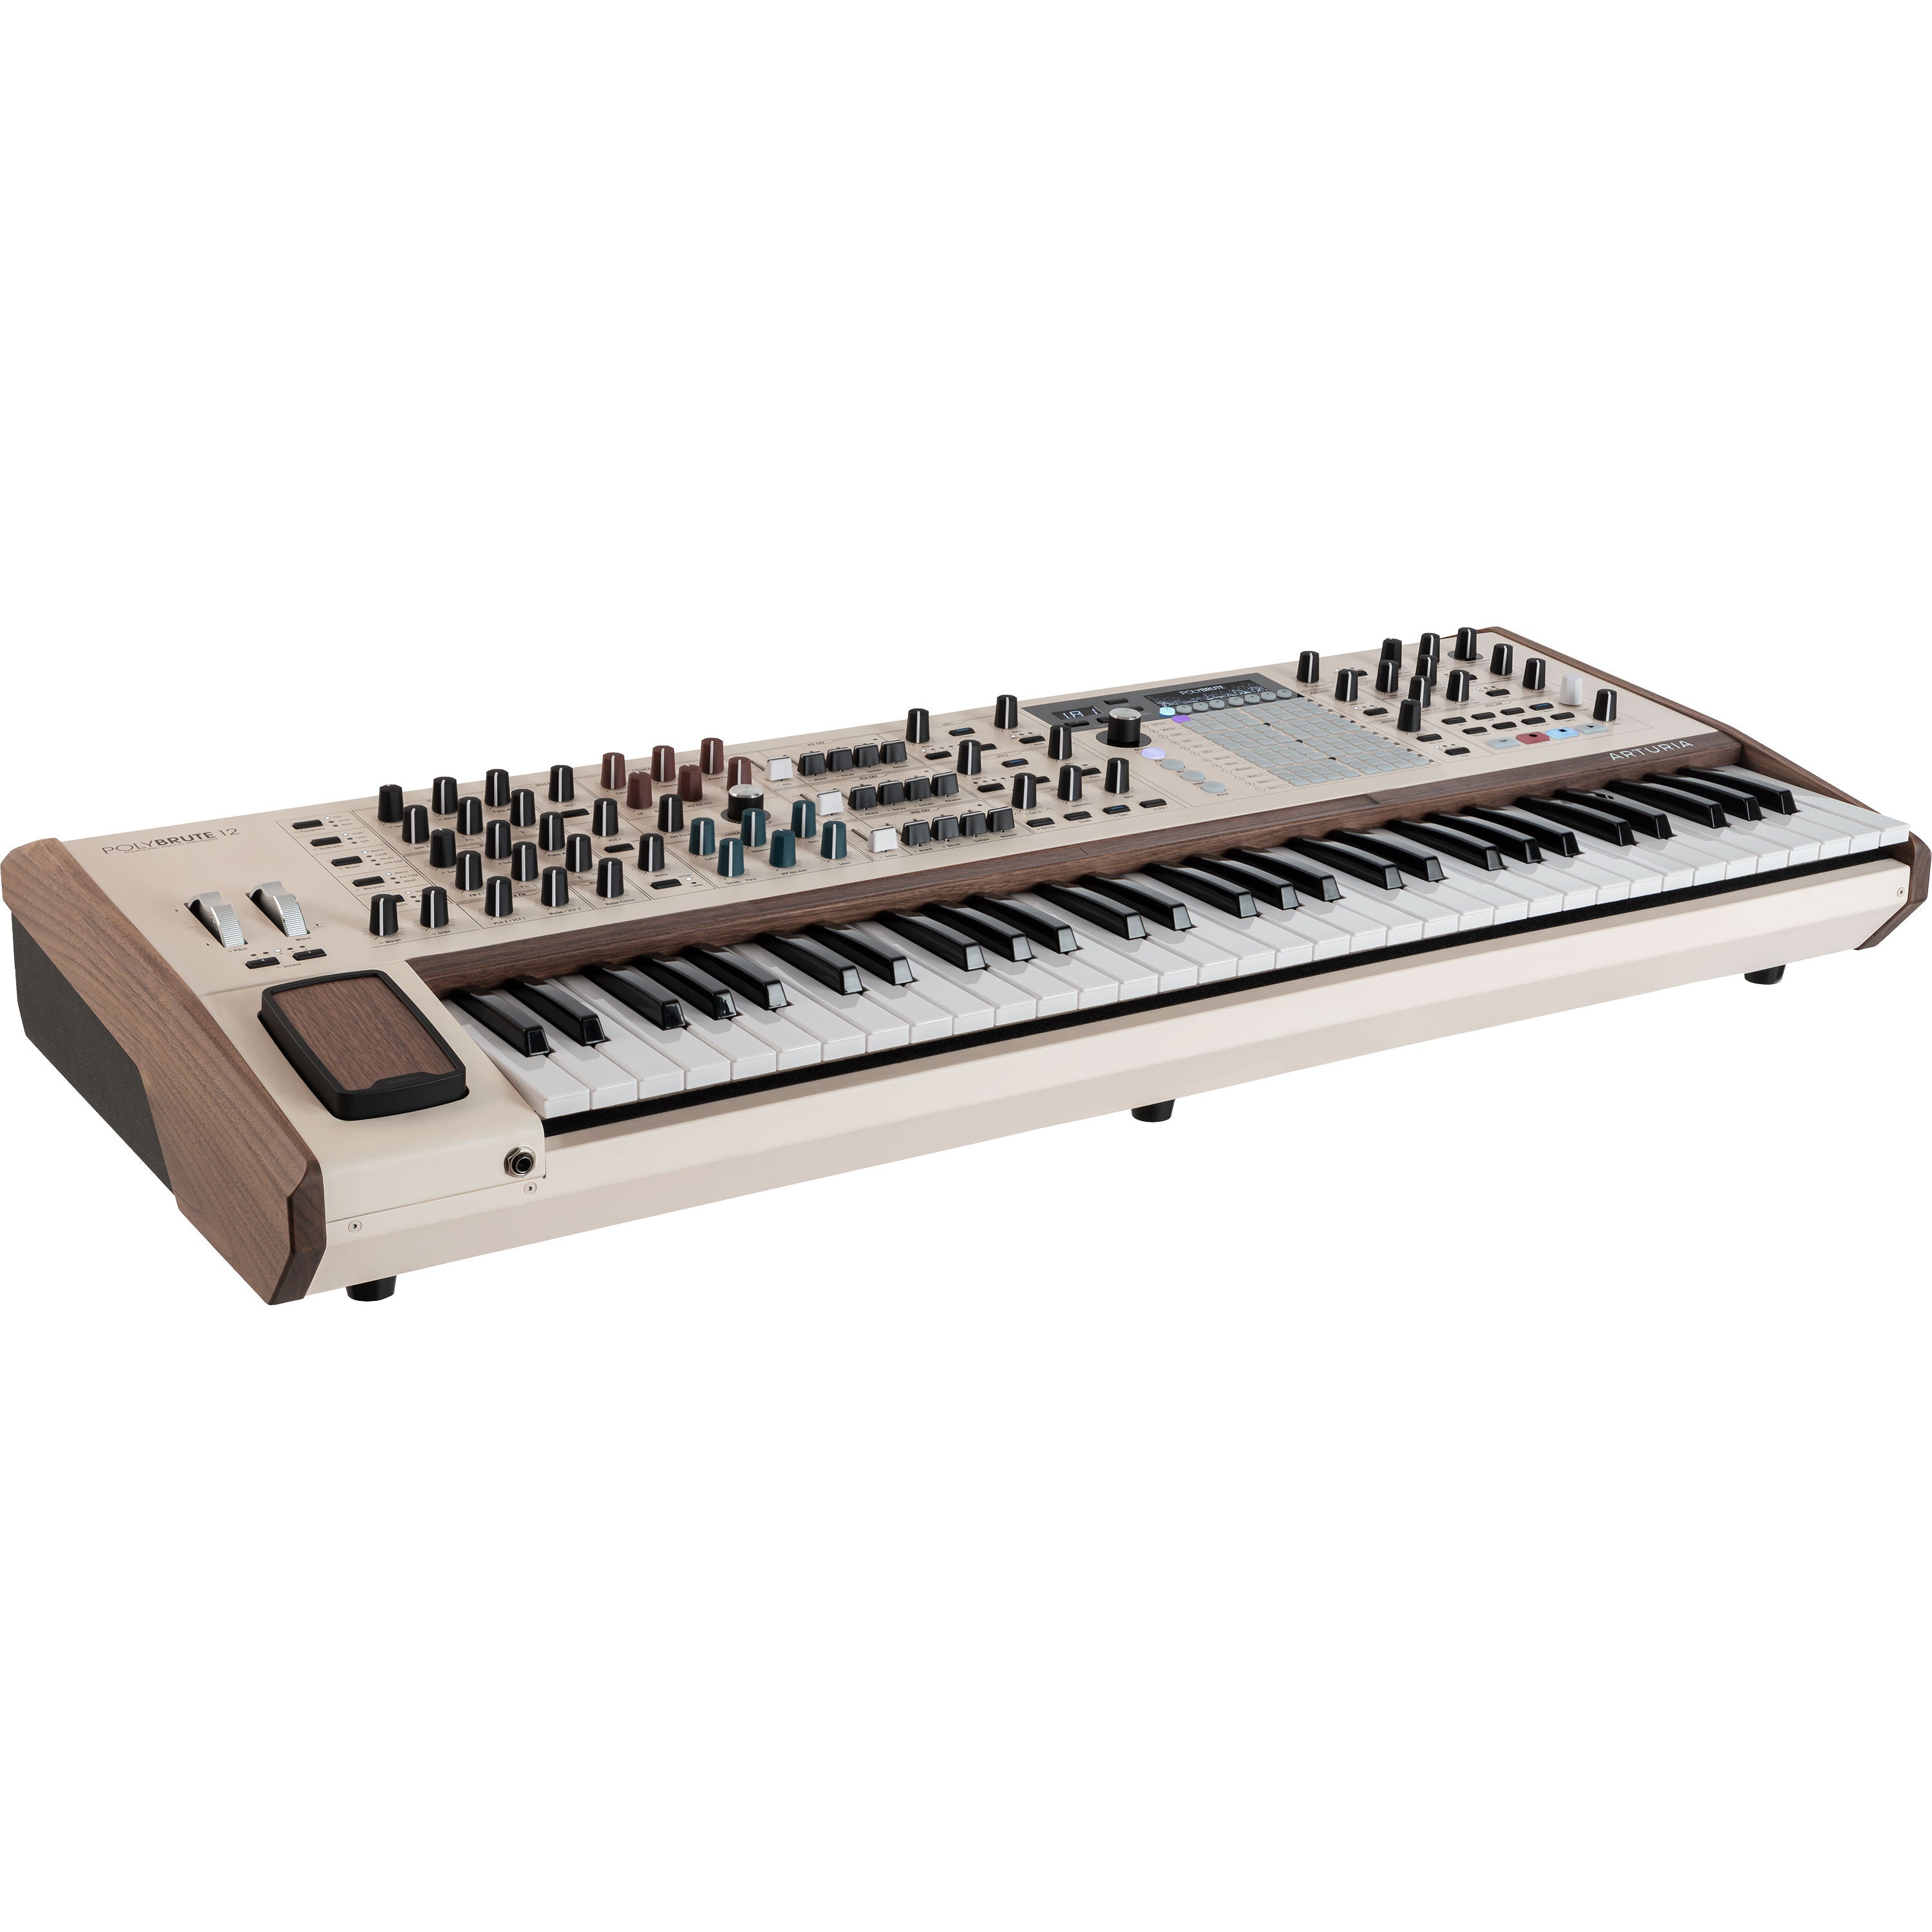 Arturia PolyBrute 12 12-Voice Polyphonic Analog Synthesizer STAGE RIG